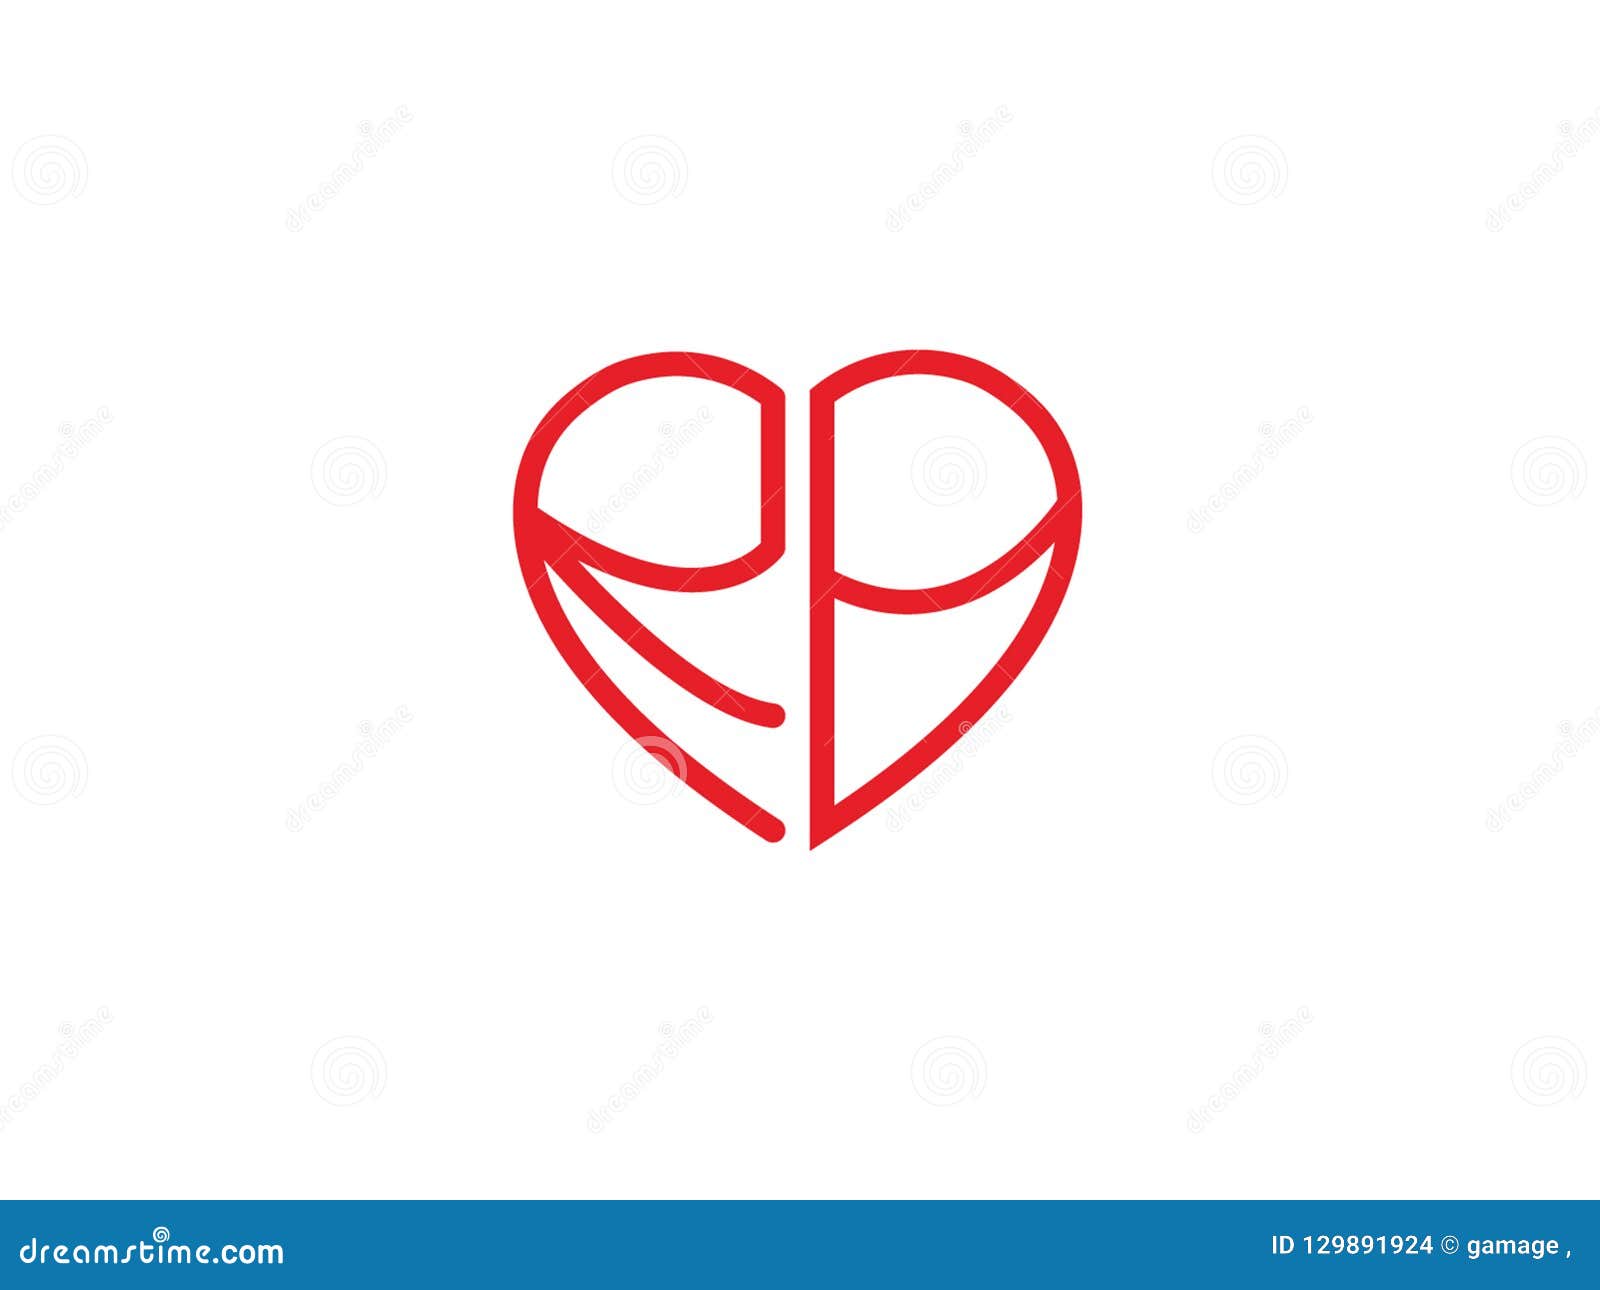 LV Initial Heart Shape Red Colored Love Logo Stock Vector - Illustration of  circle, business: 130141741